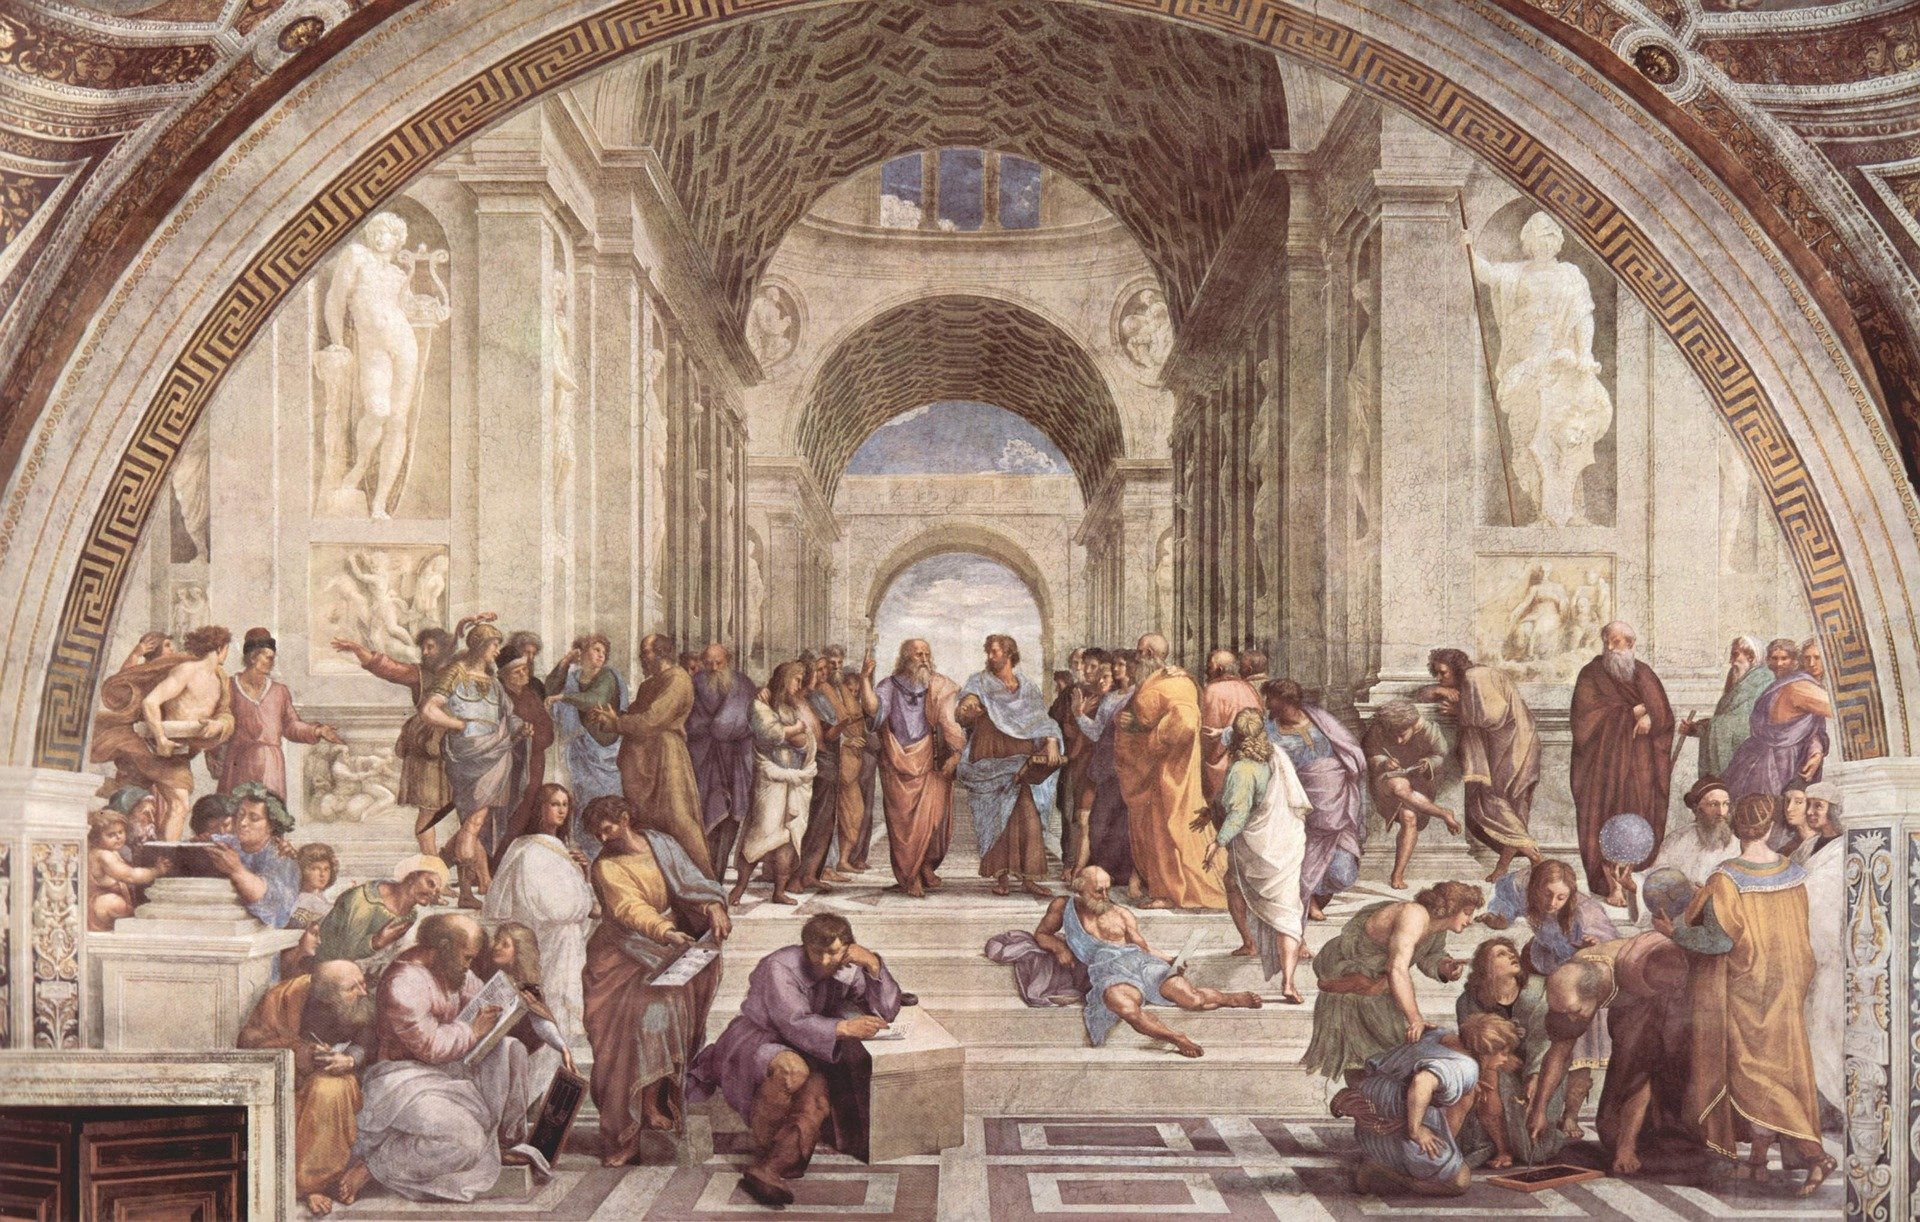 Raphael painted the rebirth of Greek philosophy in the 16th century. Is it time for a rebirth of ethics in the 21st century?